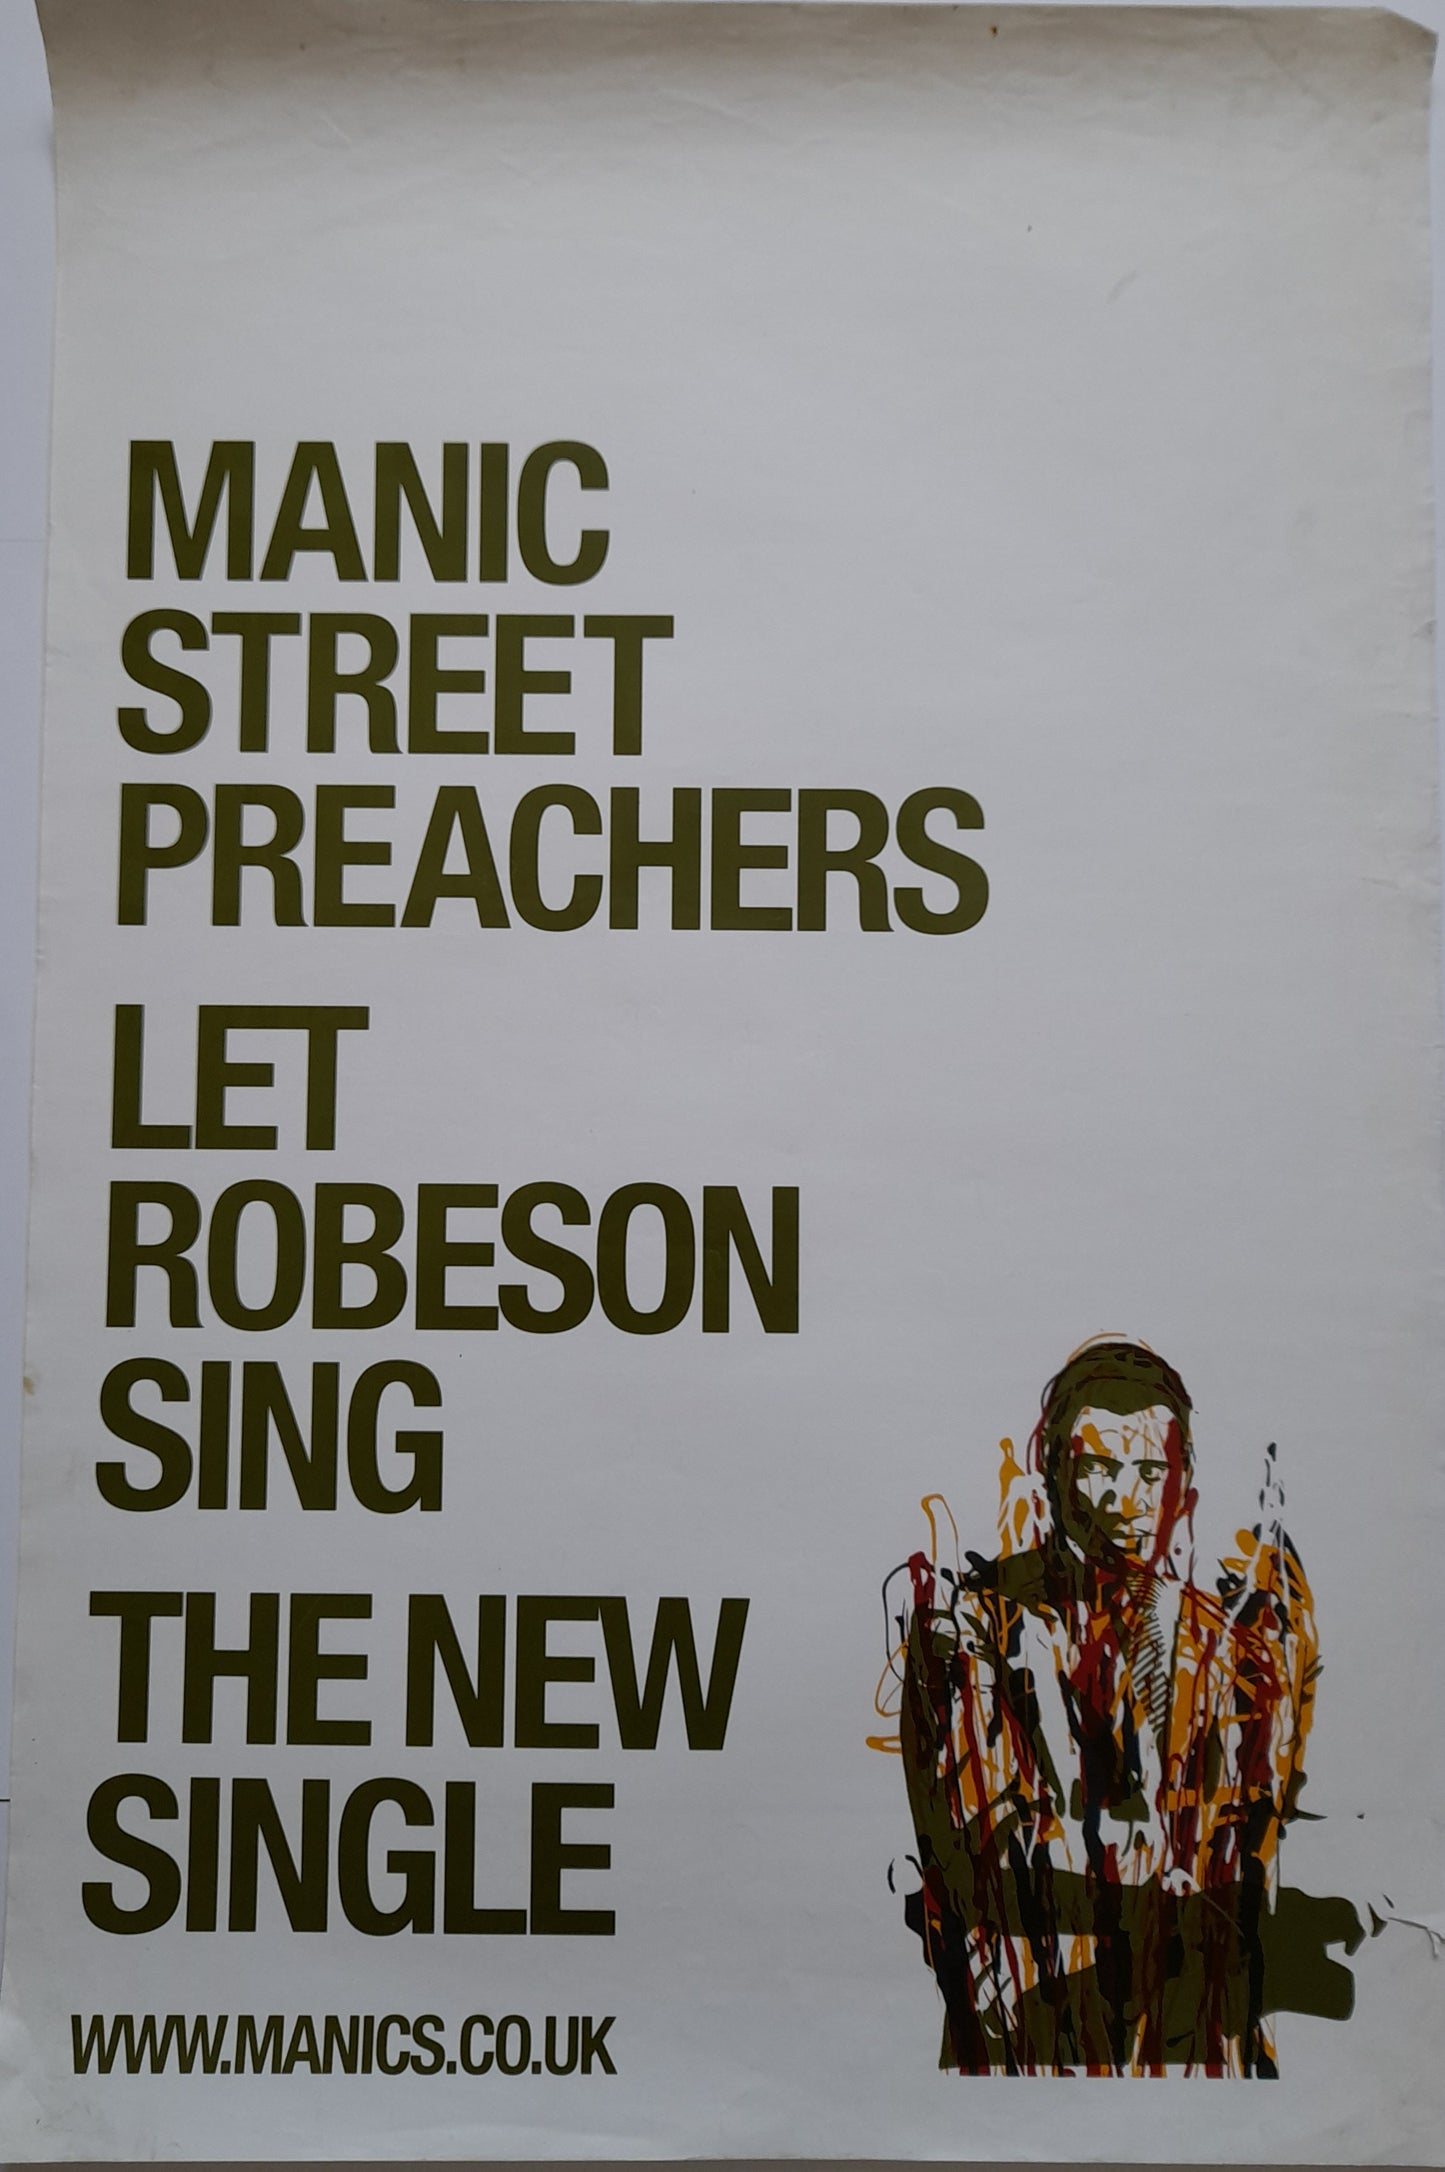 Manic Street Preachers Let Robeson Sing Promotional Poster